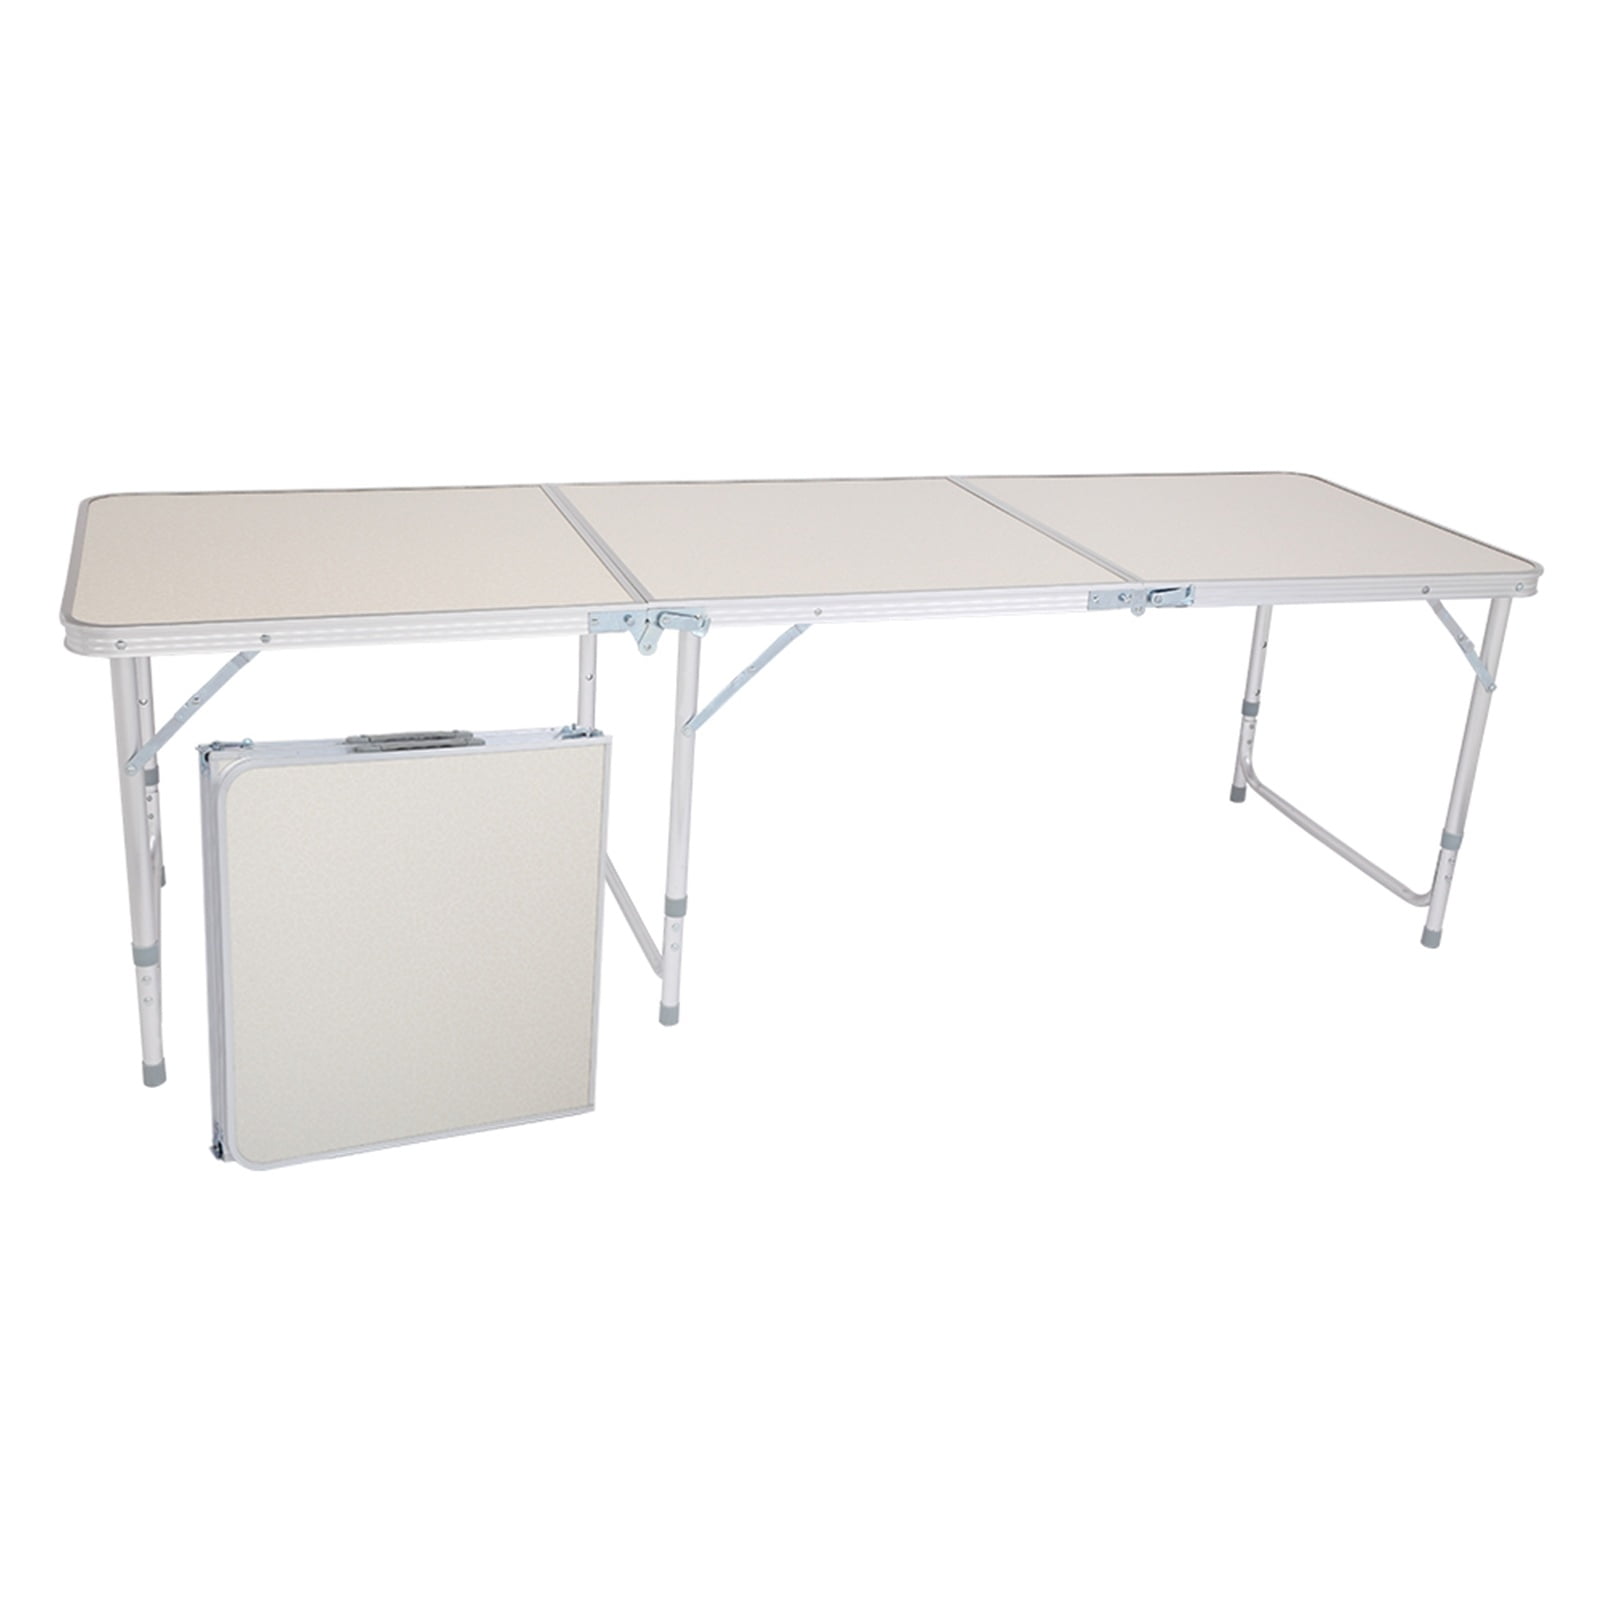 Portable Folding Aluminum Table Outdoor Picnic Party Dining Camping Desk Top US